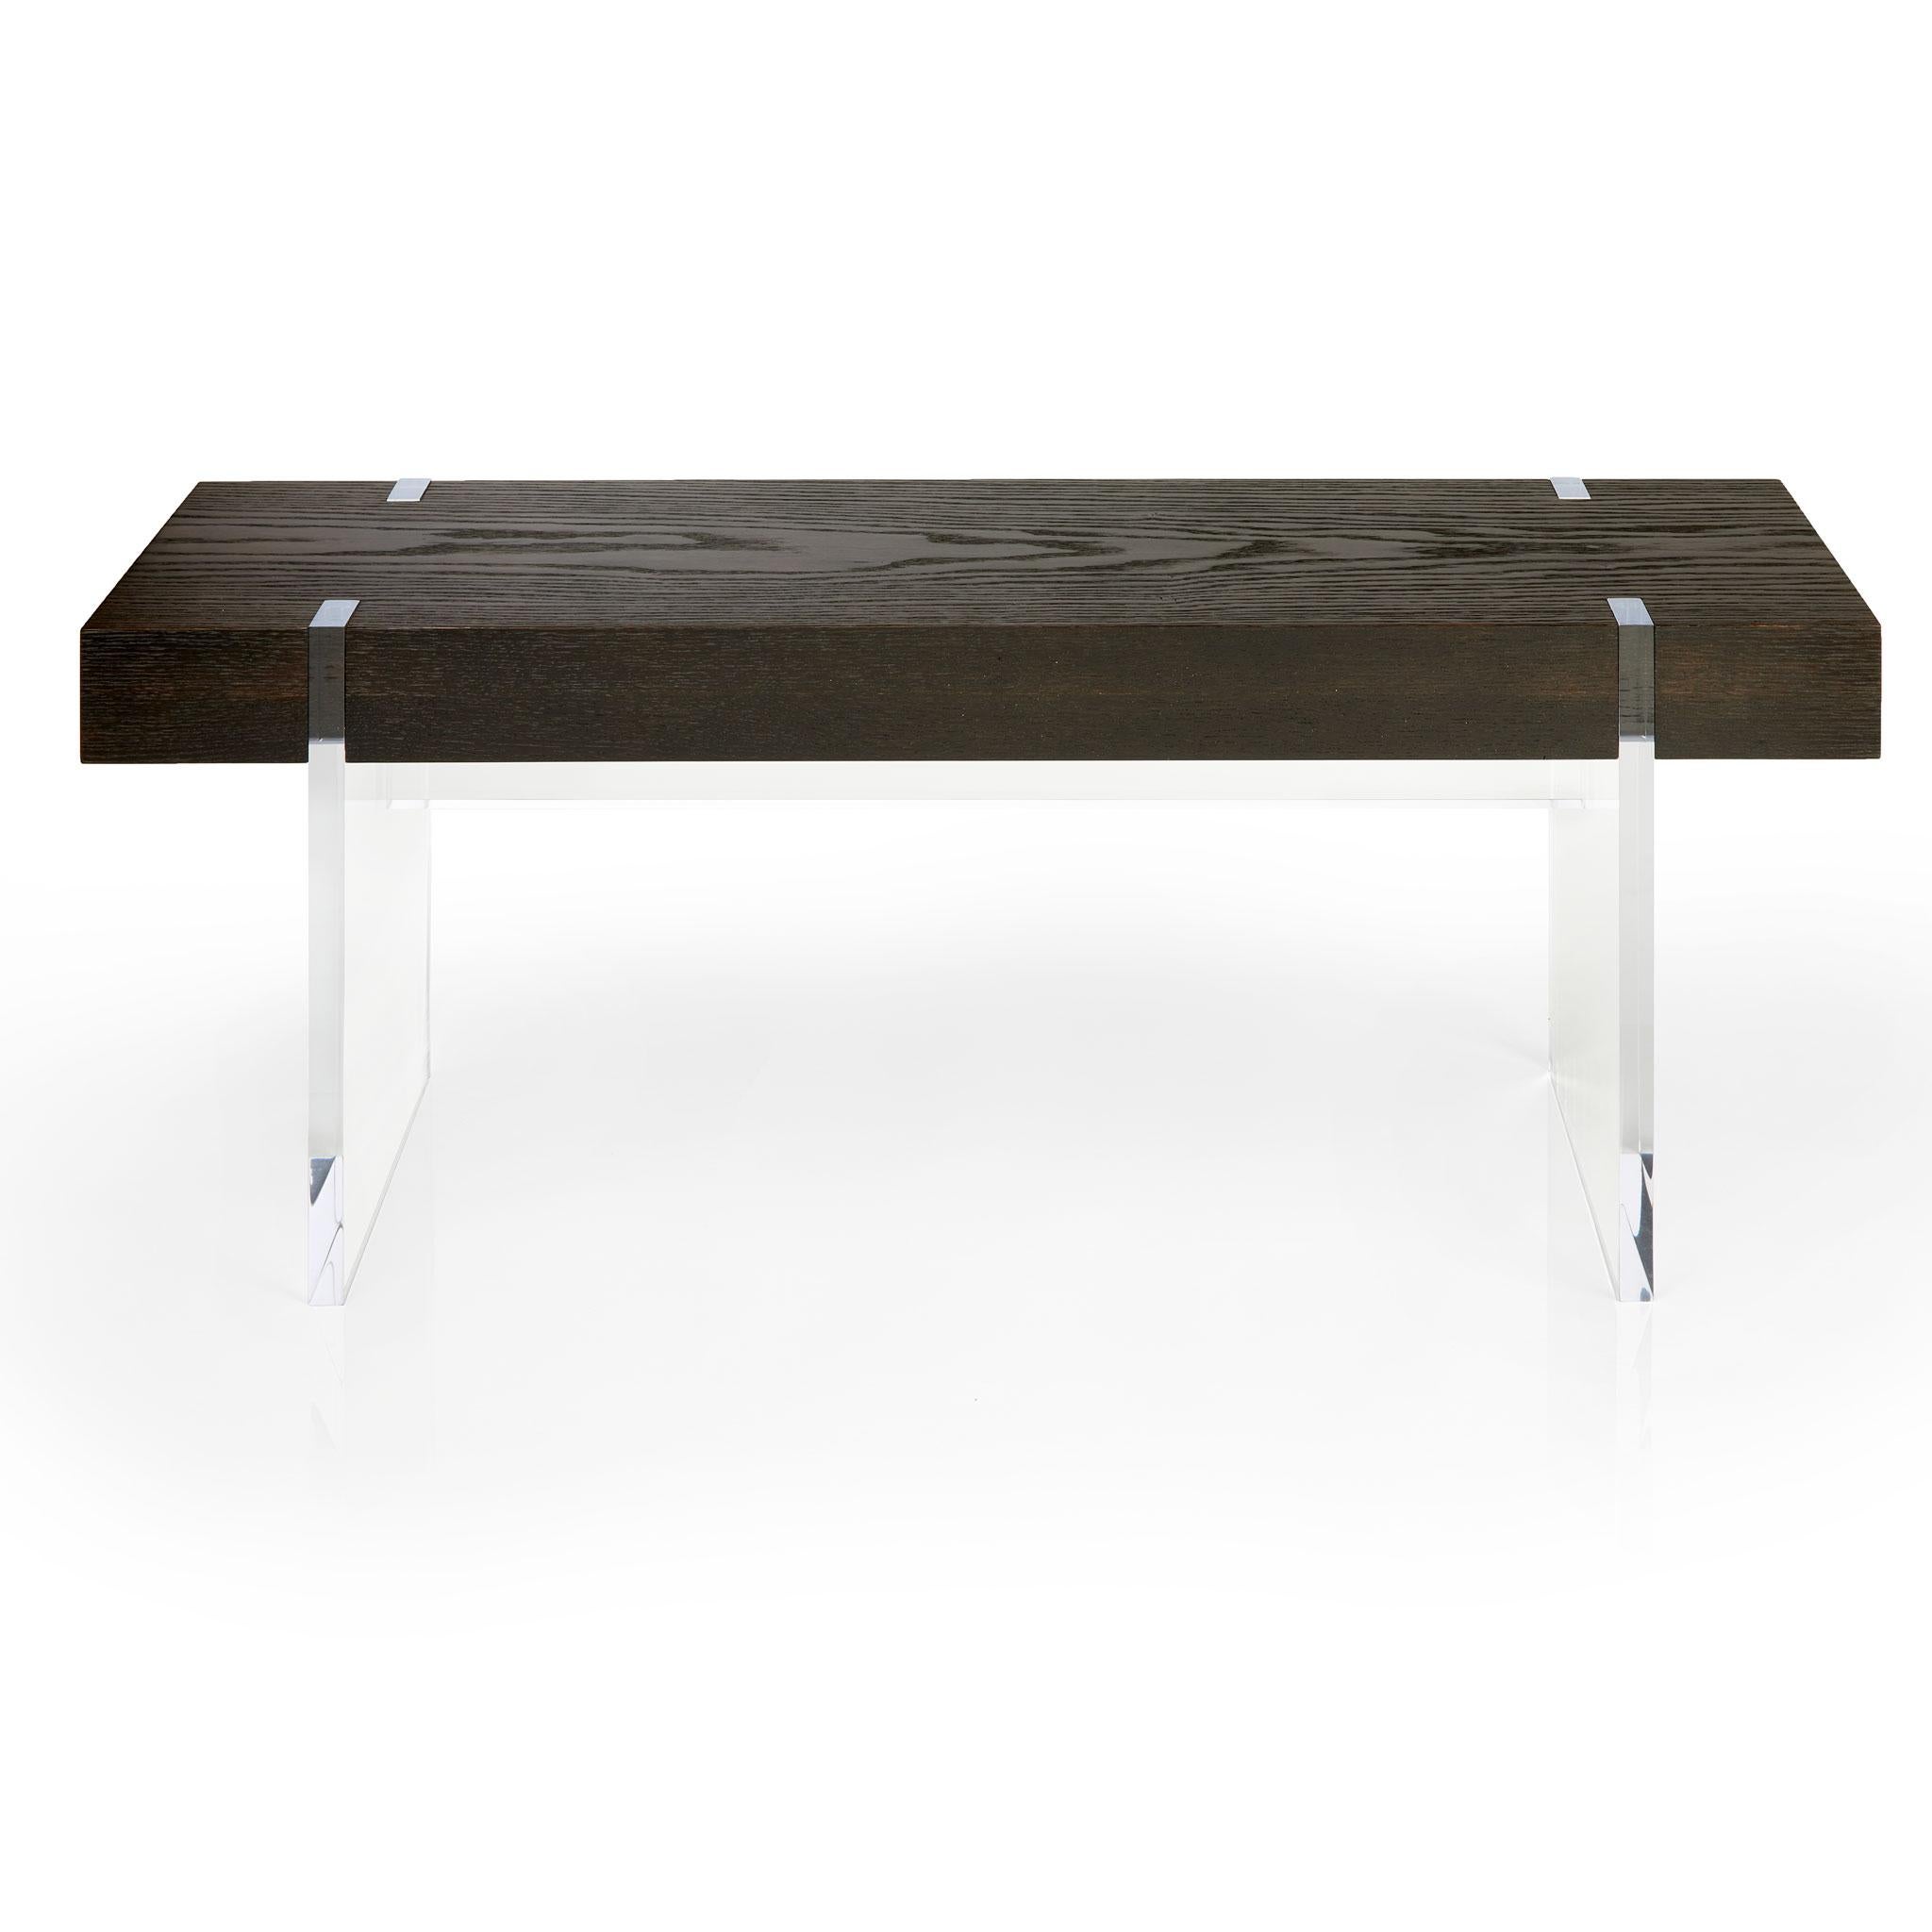 The elegant Tillikum bench features a rare solid wood top set on clear acrylic frame and legs for an airy, floating effect. The minimalist design by Kirk Van Ludwig combines these elements to create a modern entrance bench. The Torched Oak uses a